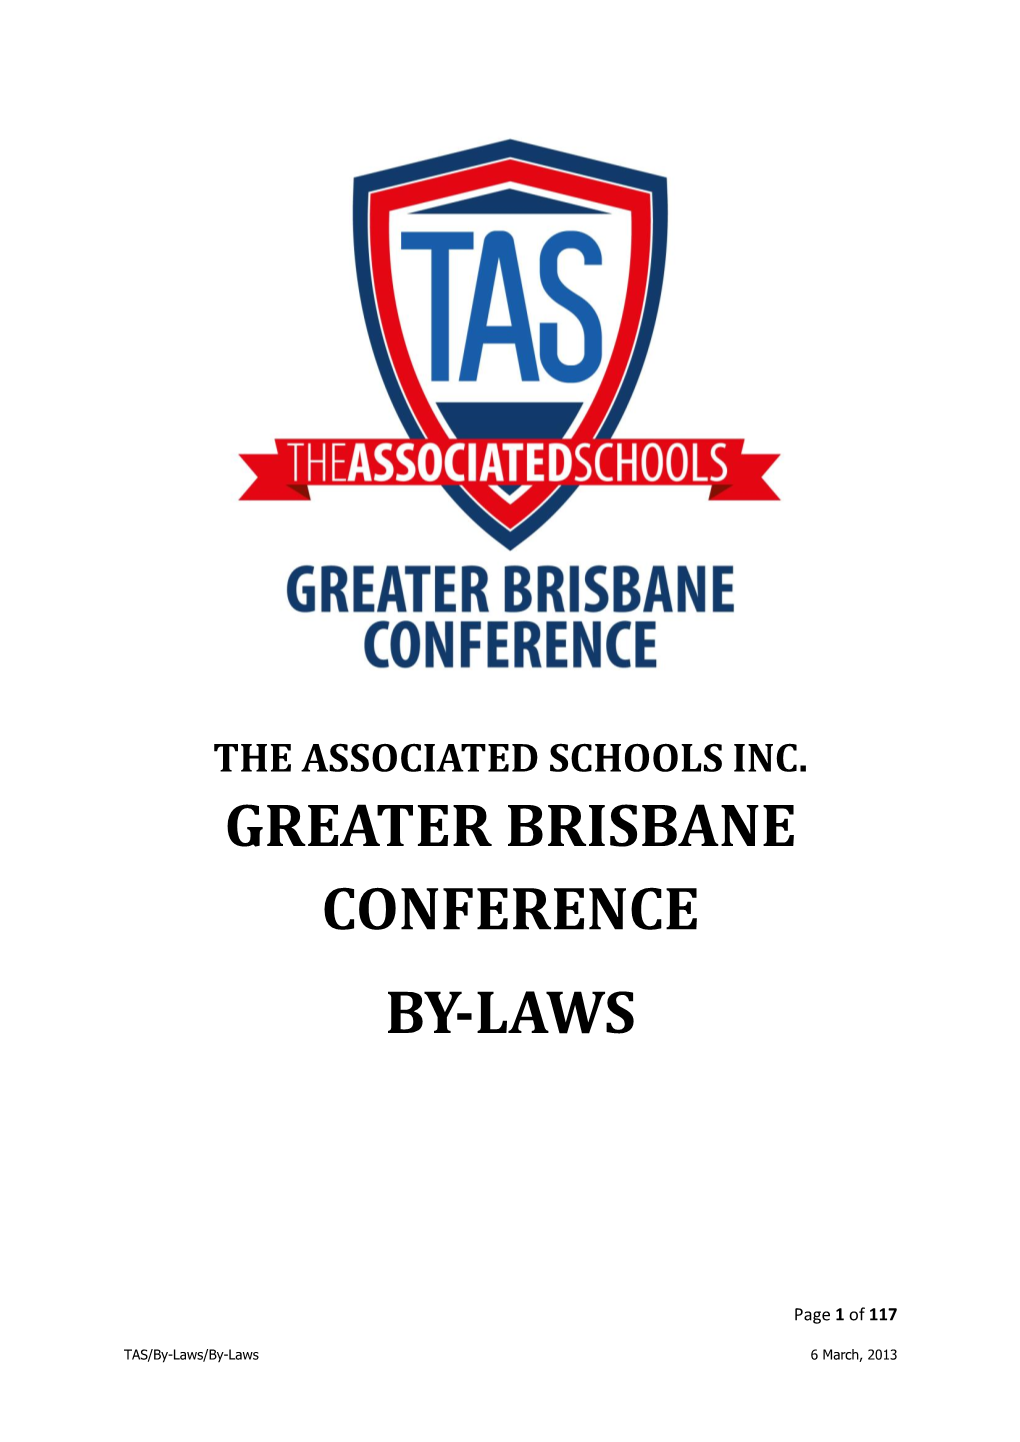 The Associated Schools Inc. Greater Brisbane Conference By-Laws